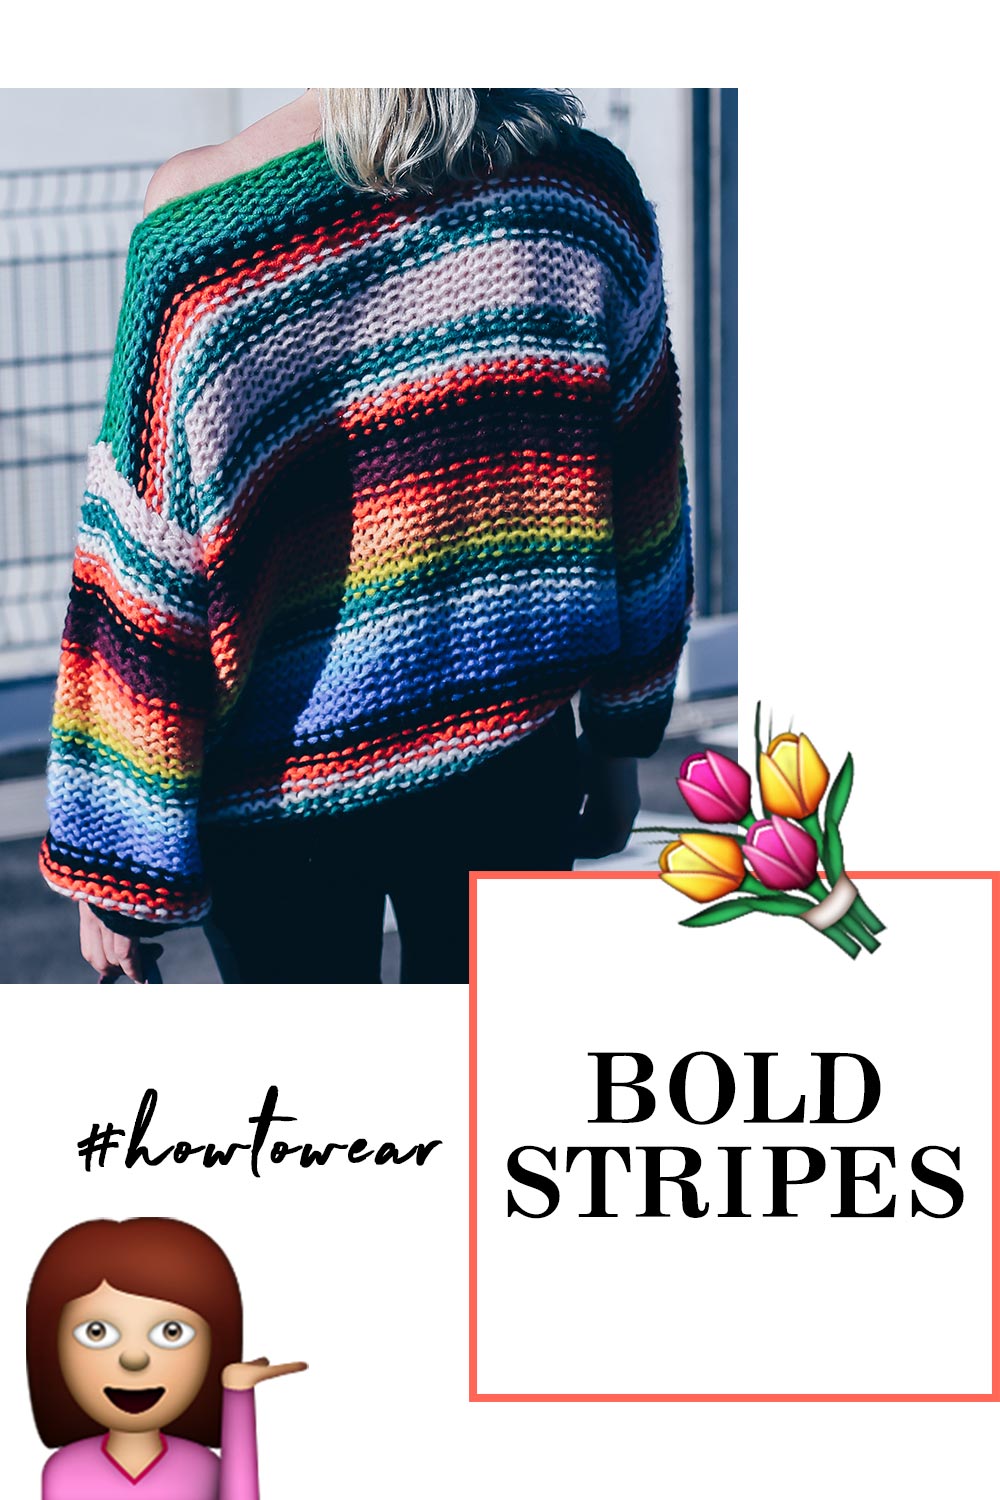 How to wear Bold Stripes, Outfit Ideen, Trendreport, Modetrends 2017, bunte Streifen kombinieren, Style Blog, Fashion Blog, Modeblog, Outfit Blog, www.whoismocca.com